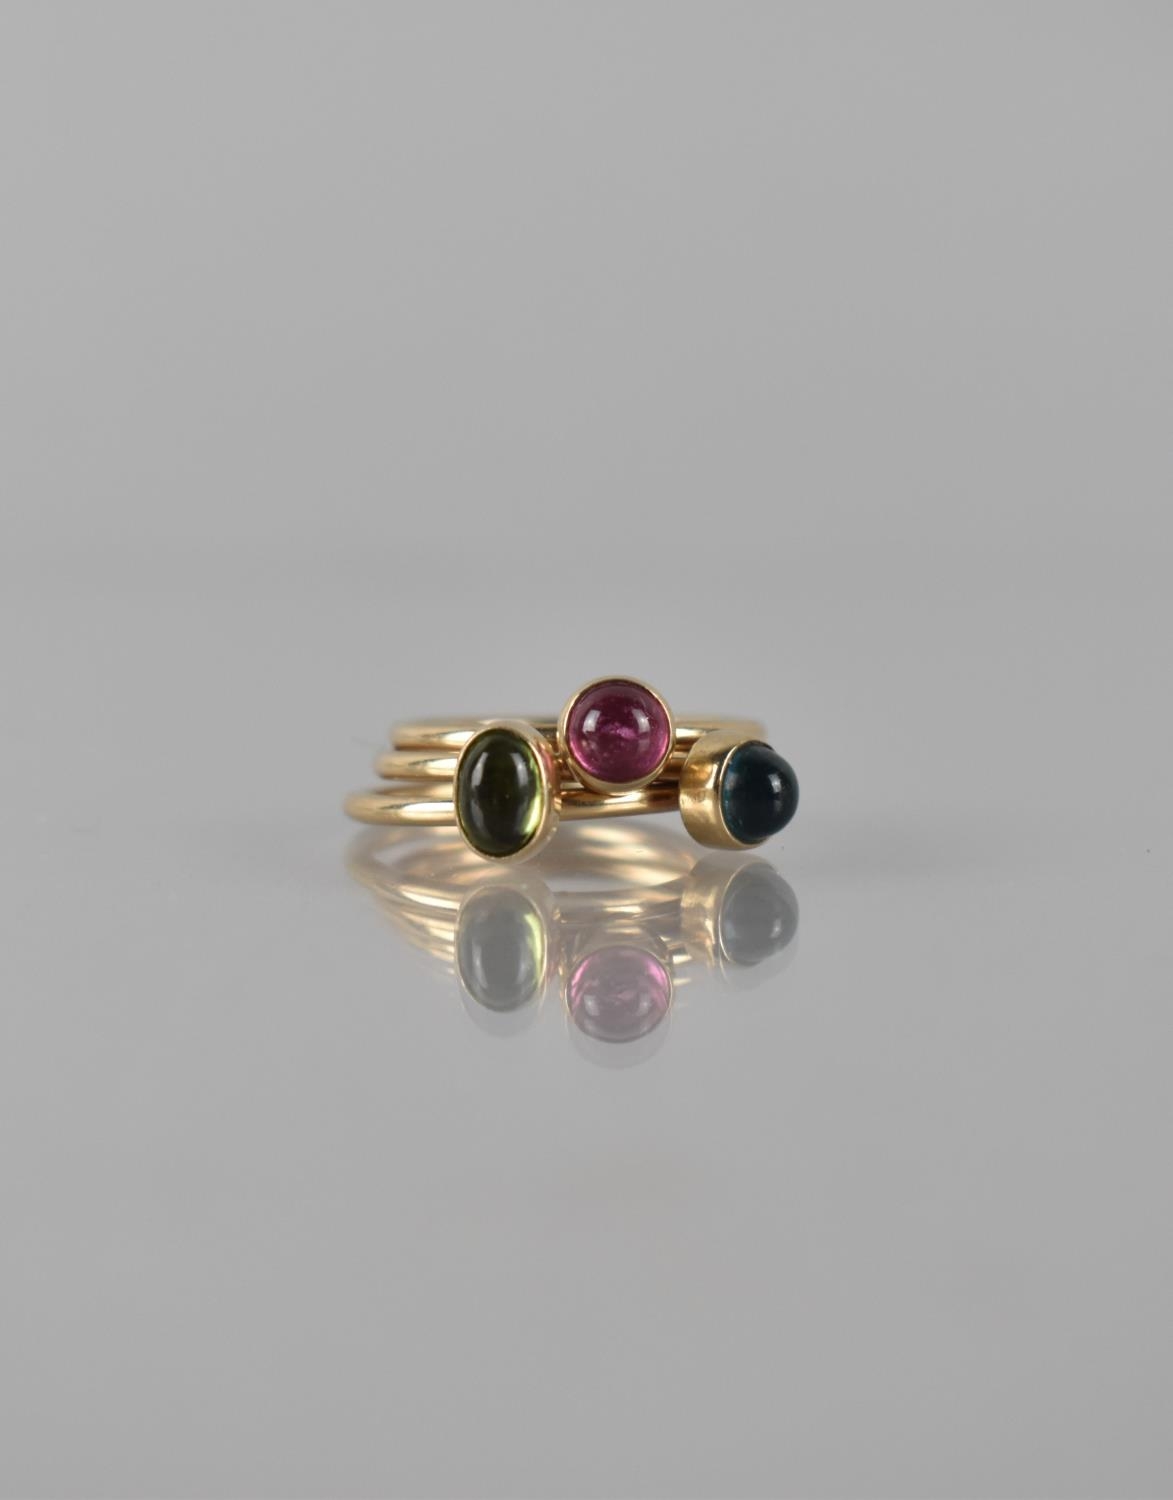 A Set of Three 9ct Gold Stacking Rings, Cabochon Stones Each Bezel Set on a Raised Head to a